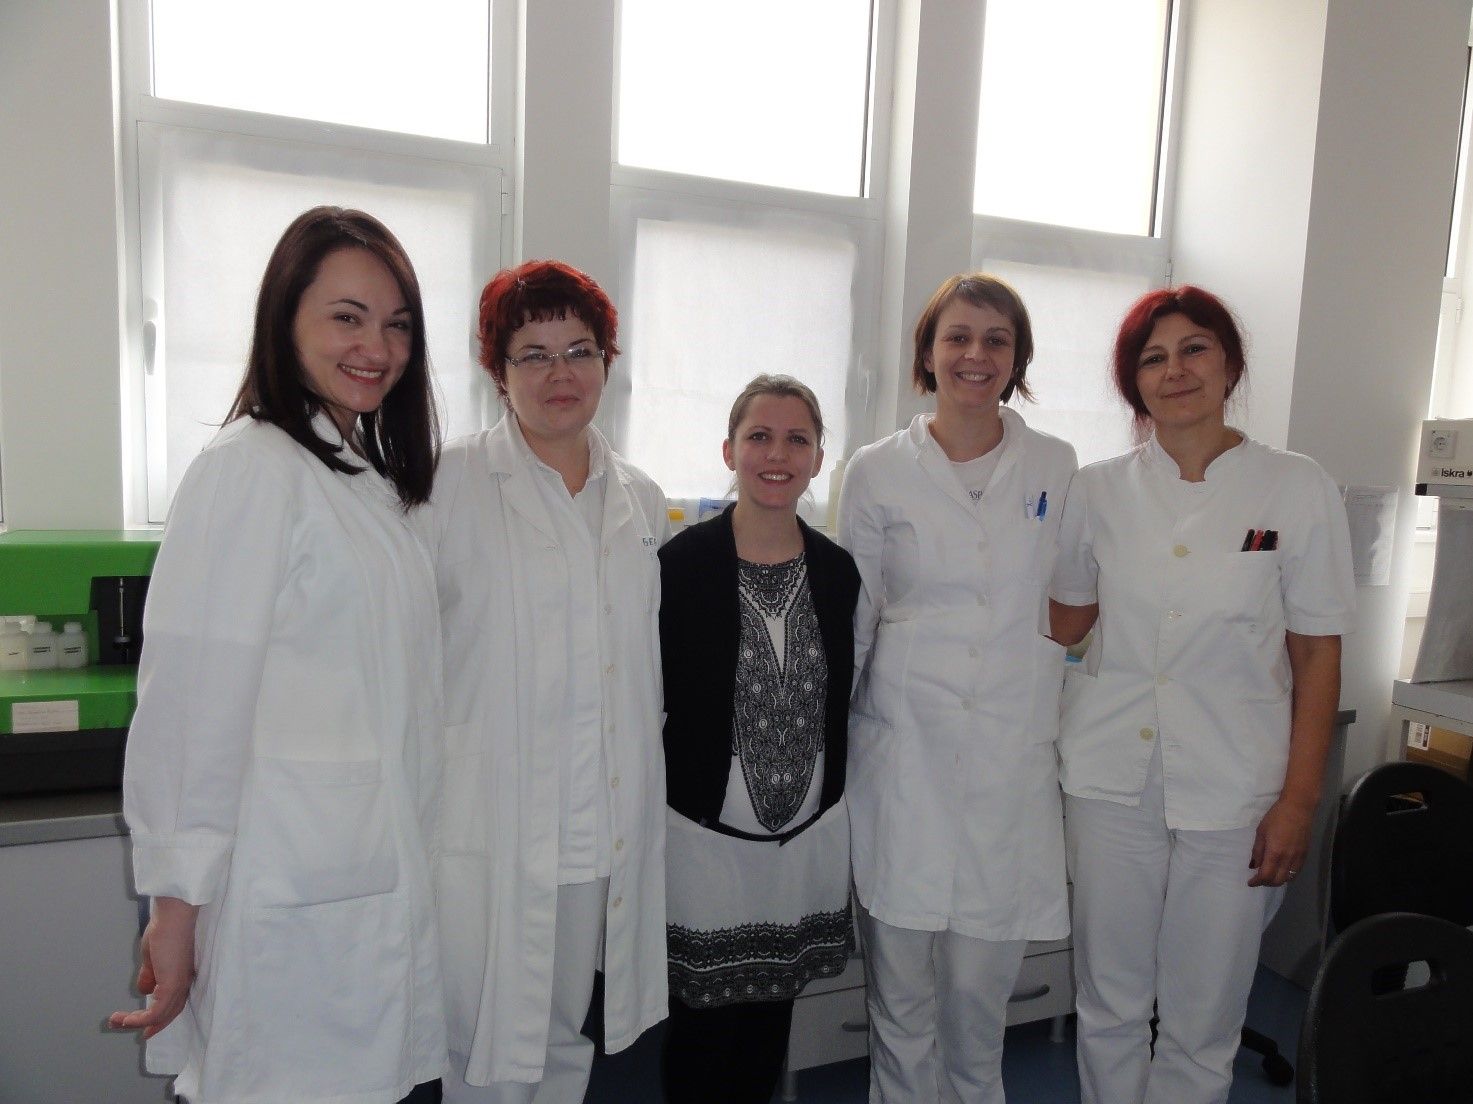 From left to right: Dr Maja Bancevic (Head of the National Reference Laboratory for Measles and Rubella in Serbia), Jelena Mitrovic (technician at Torlak Institute of Virology, Vaccines and Sera), Emilie Charpentier (LIH techician), Dr Jelena Protic (Head of laboratory at Torlak Institute of Virology, Vaccines and Sera) and Ana Novakovic (technician at Torlak Institute of Virology, Vaccines and Sera)..